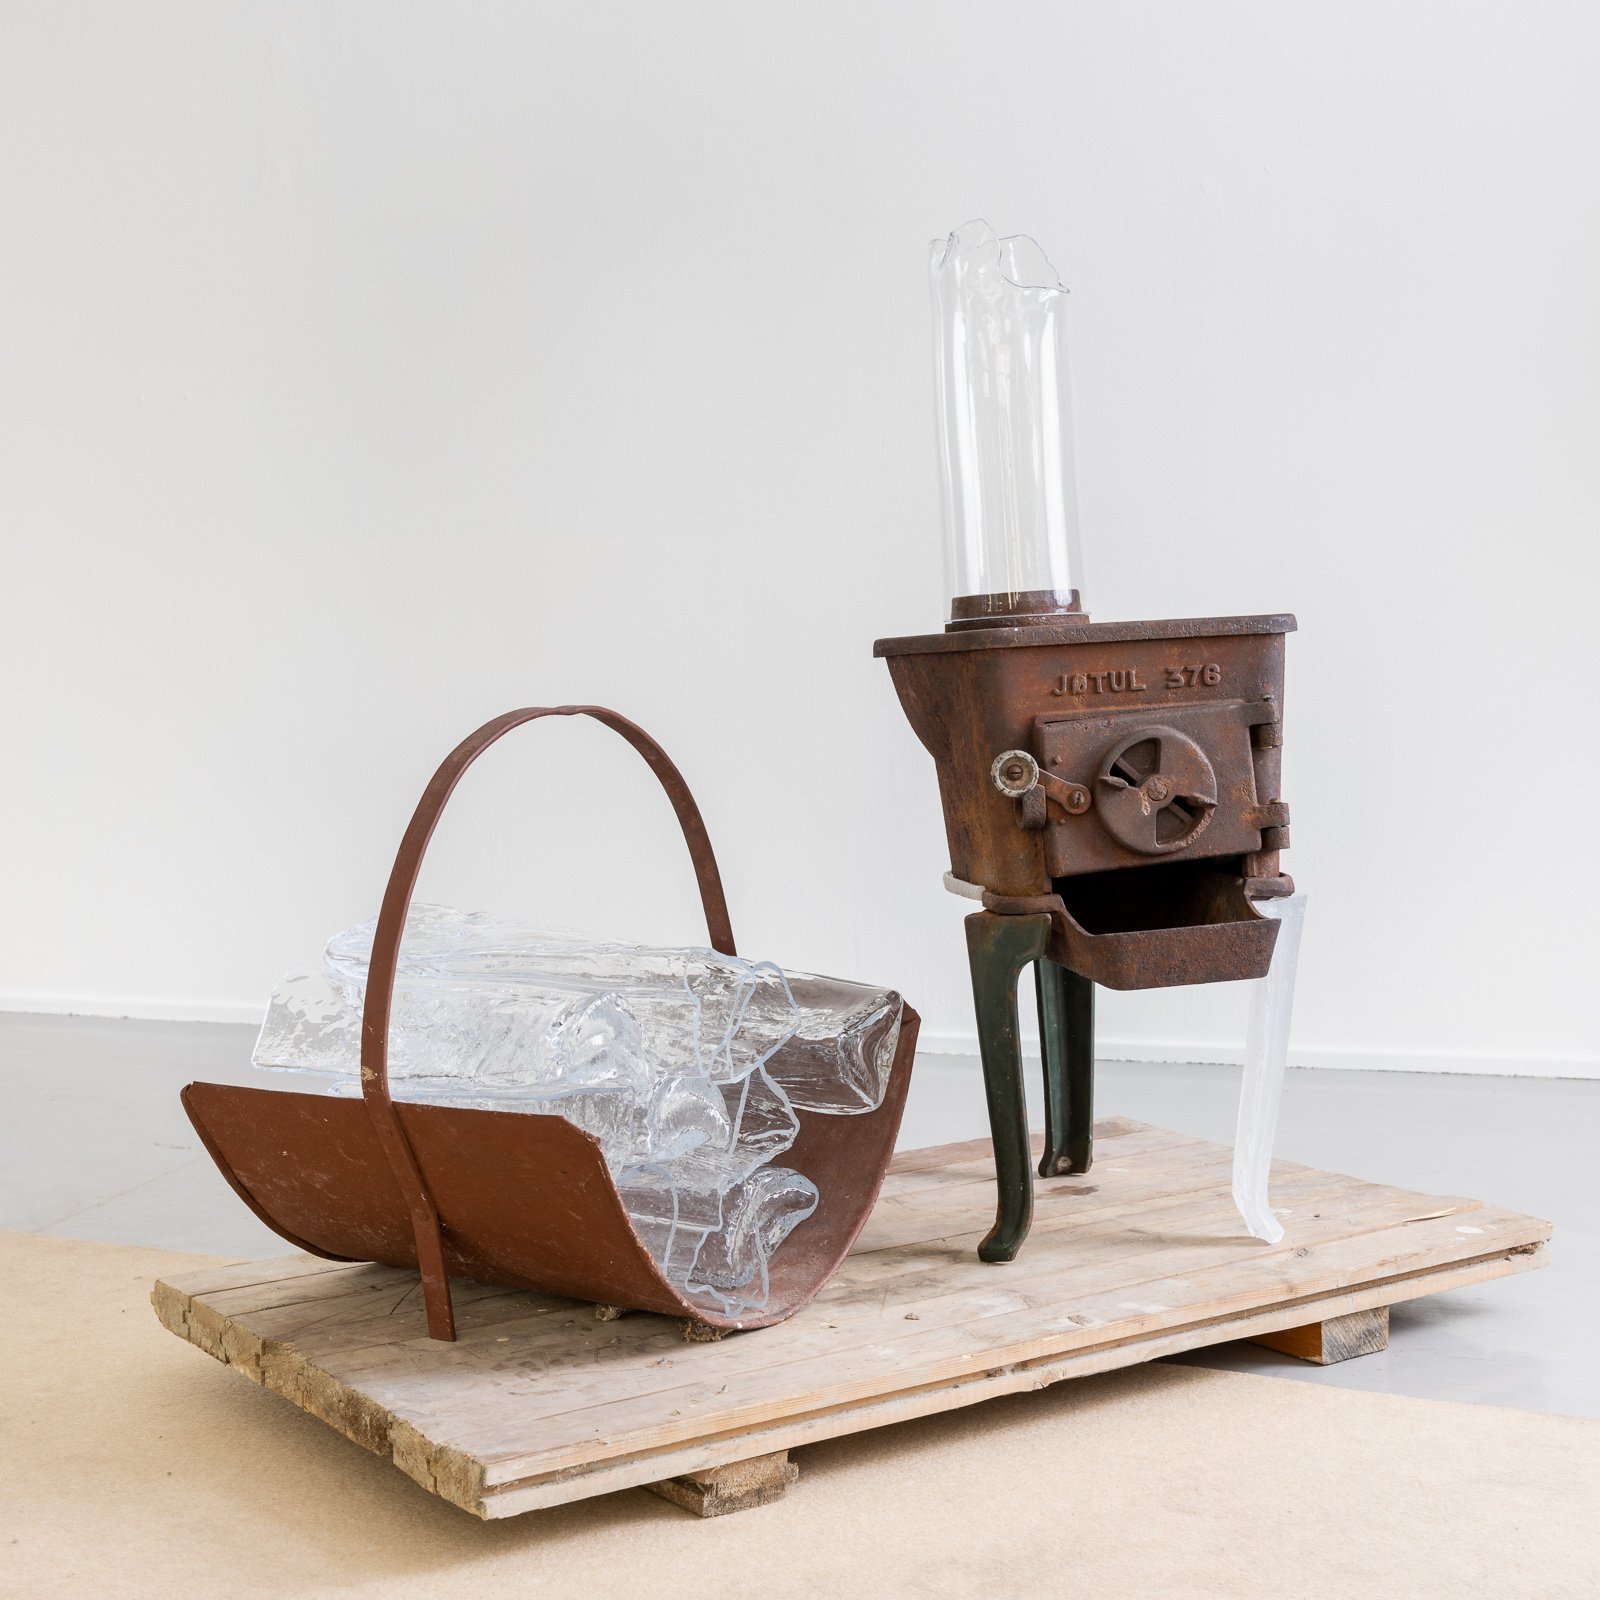  Jøtul 376  2022, Rescued object of cast iron, kiln cast and blown glass, grinded and polished   Photo Thomas Tveter 